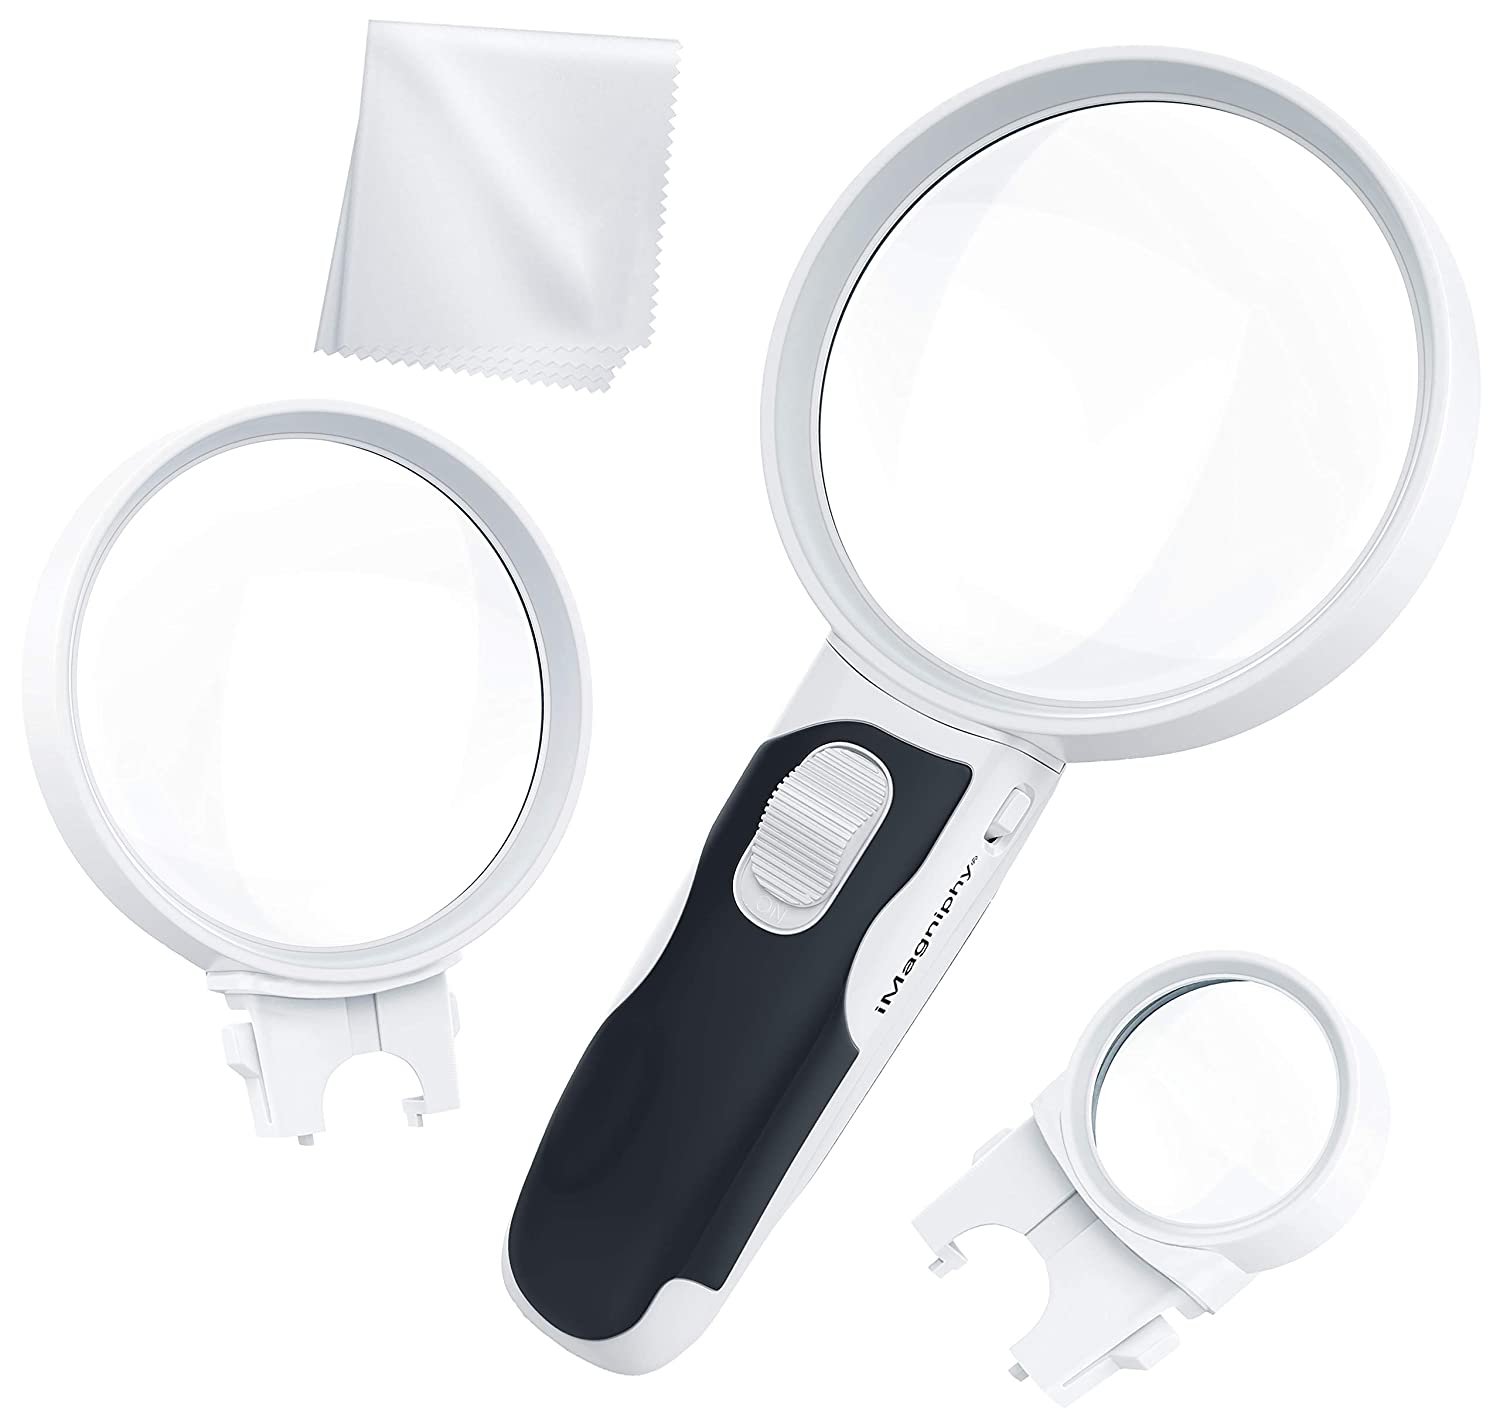 9 Best Kids Magnifying Glass 2022 - Buying Guide 4